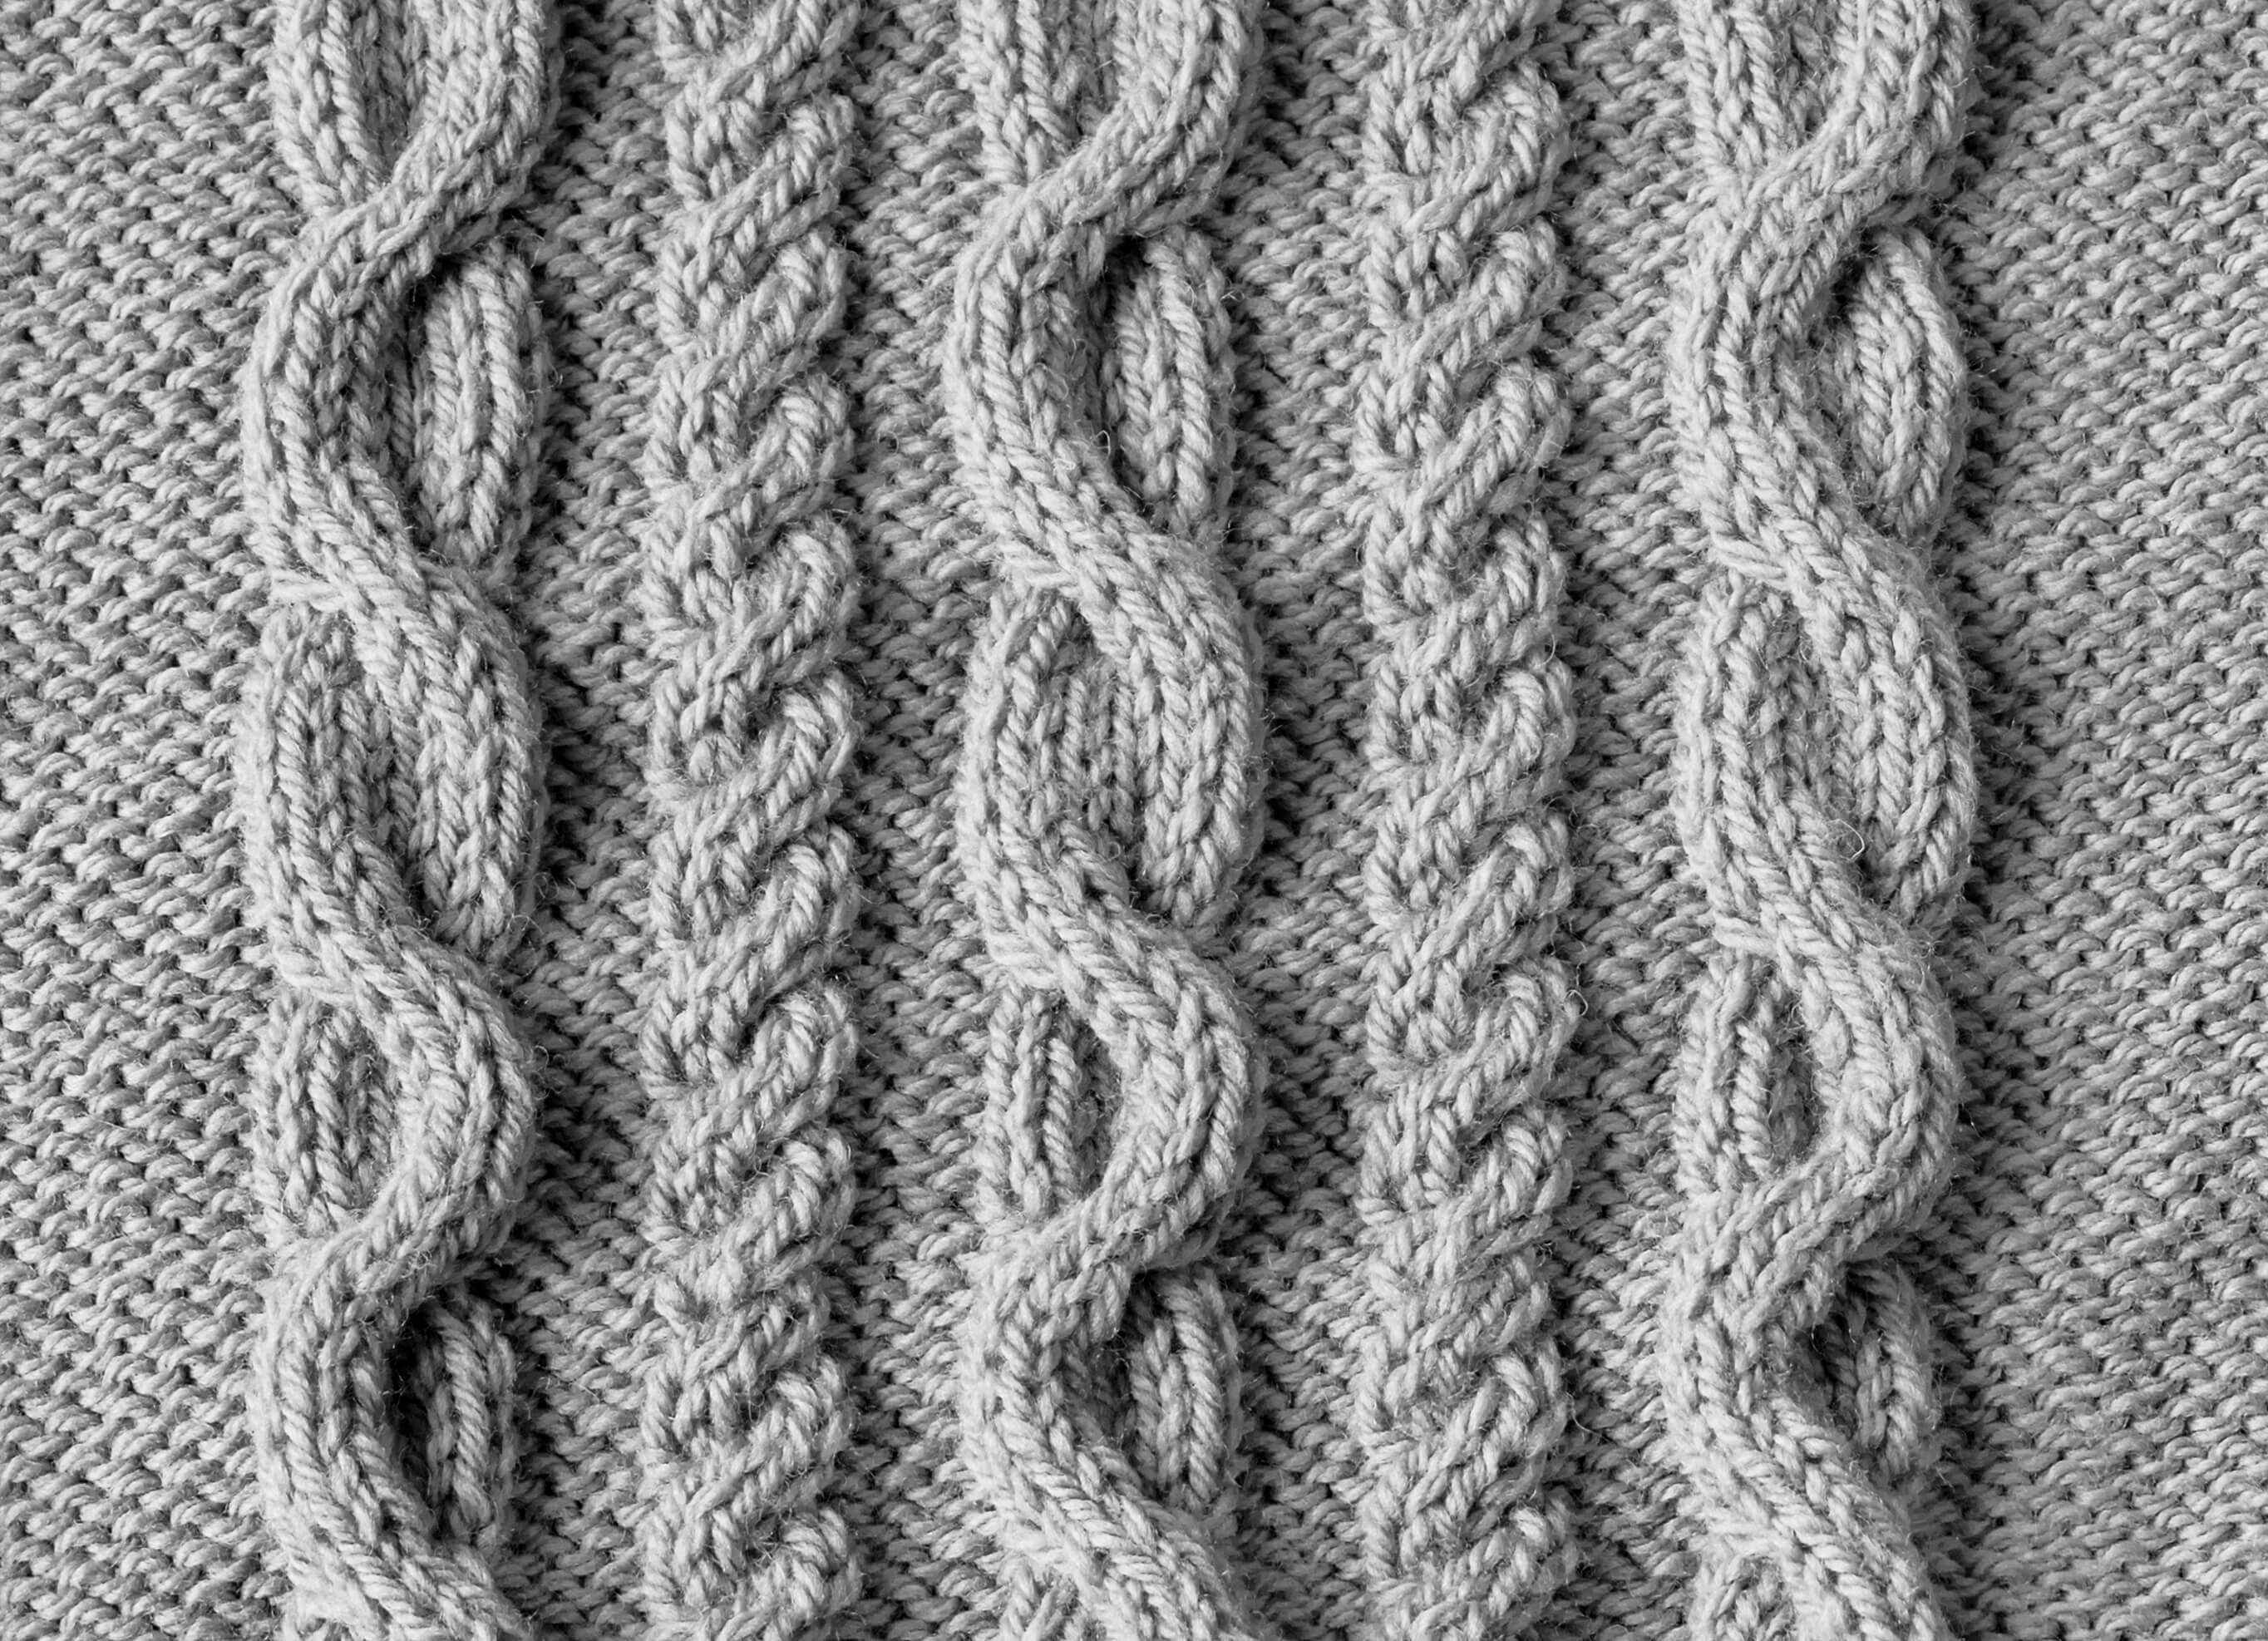 Knit Texture Patterns Cable Knit